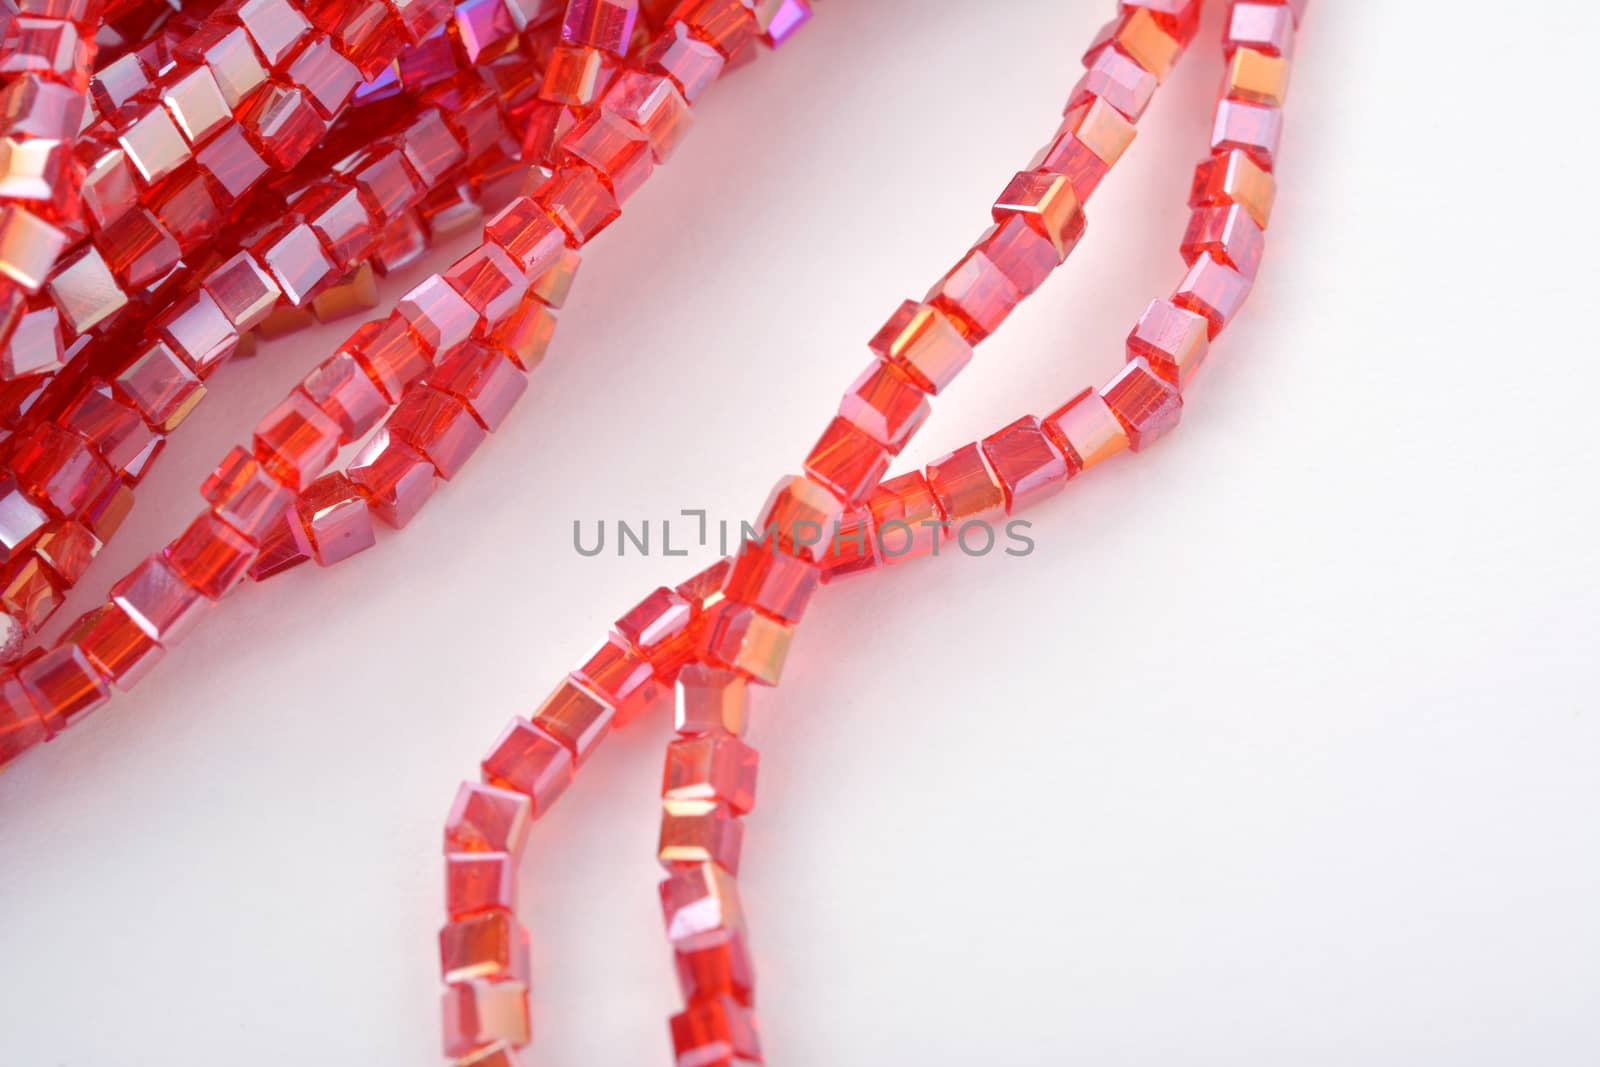 Beautiful Red scarlet, ruby Glass Sparkle Crystal Isoalted Beads on white background. Use for diy beaded jewelry. Space for text